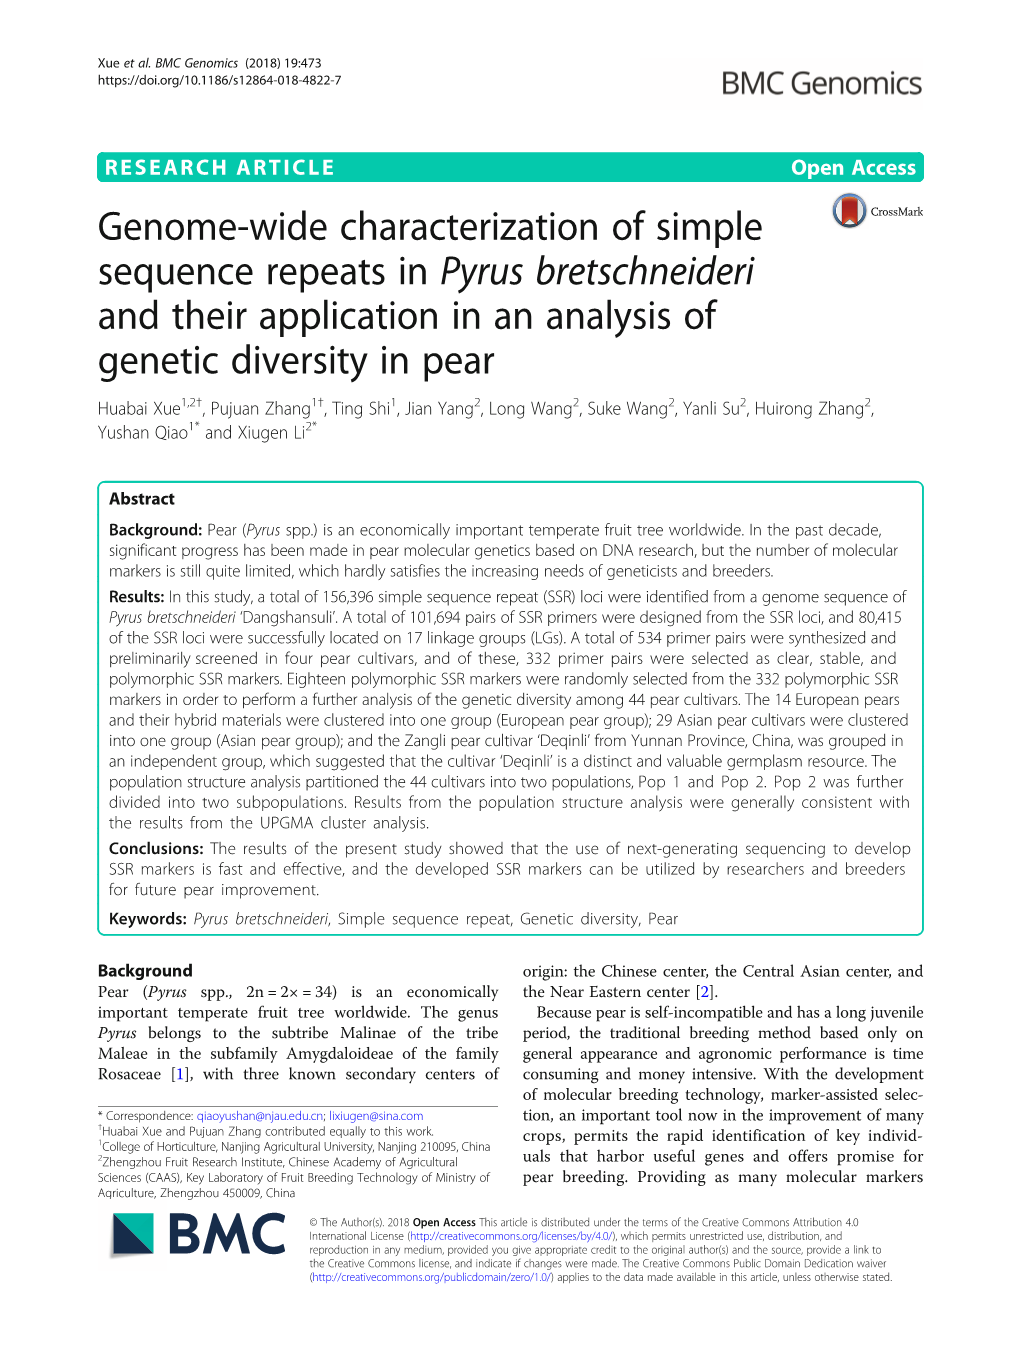 Genome-Wide Characterization of Simple Sequence Repeats in Pyrus